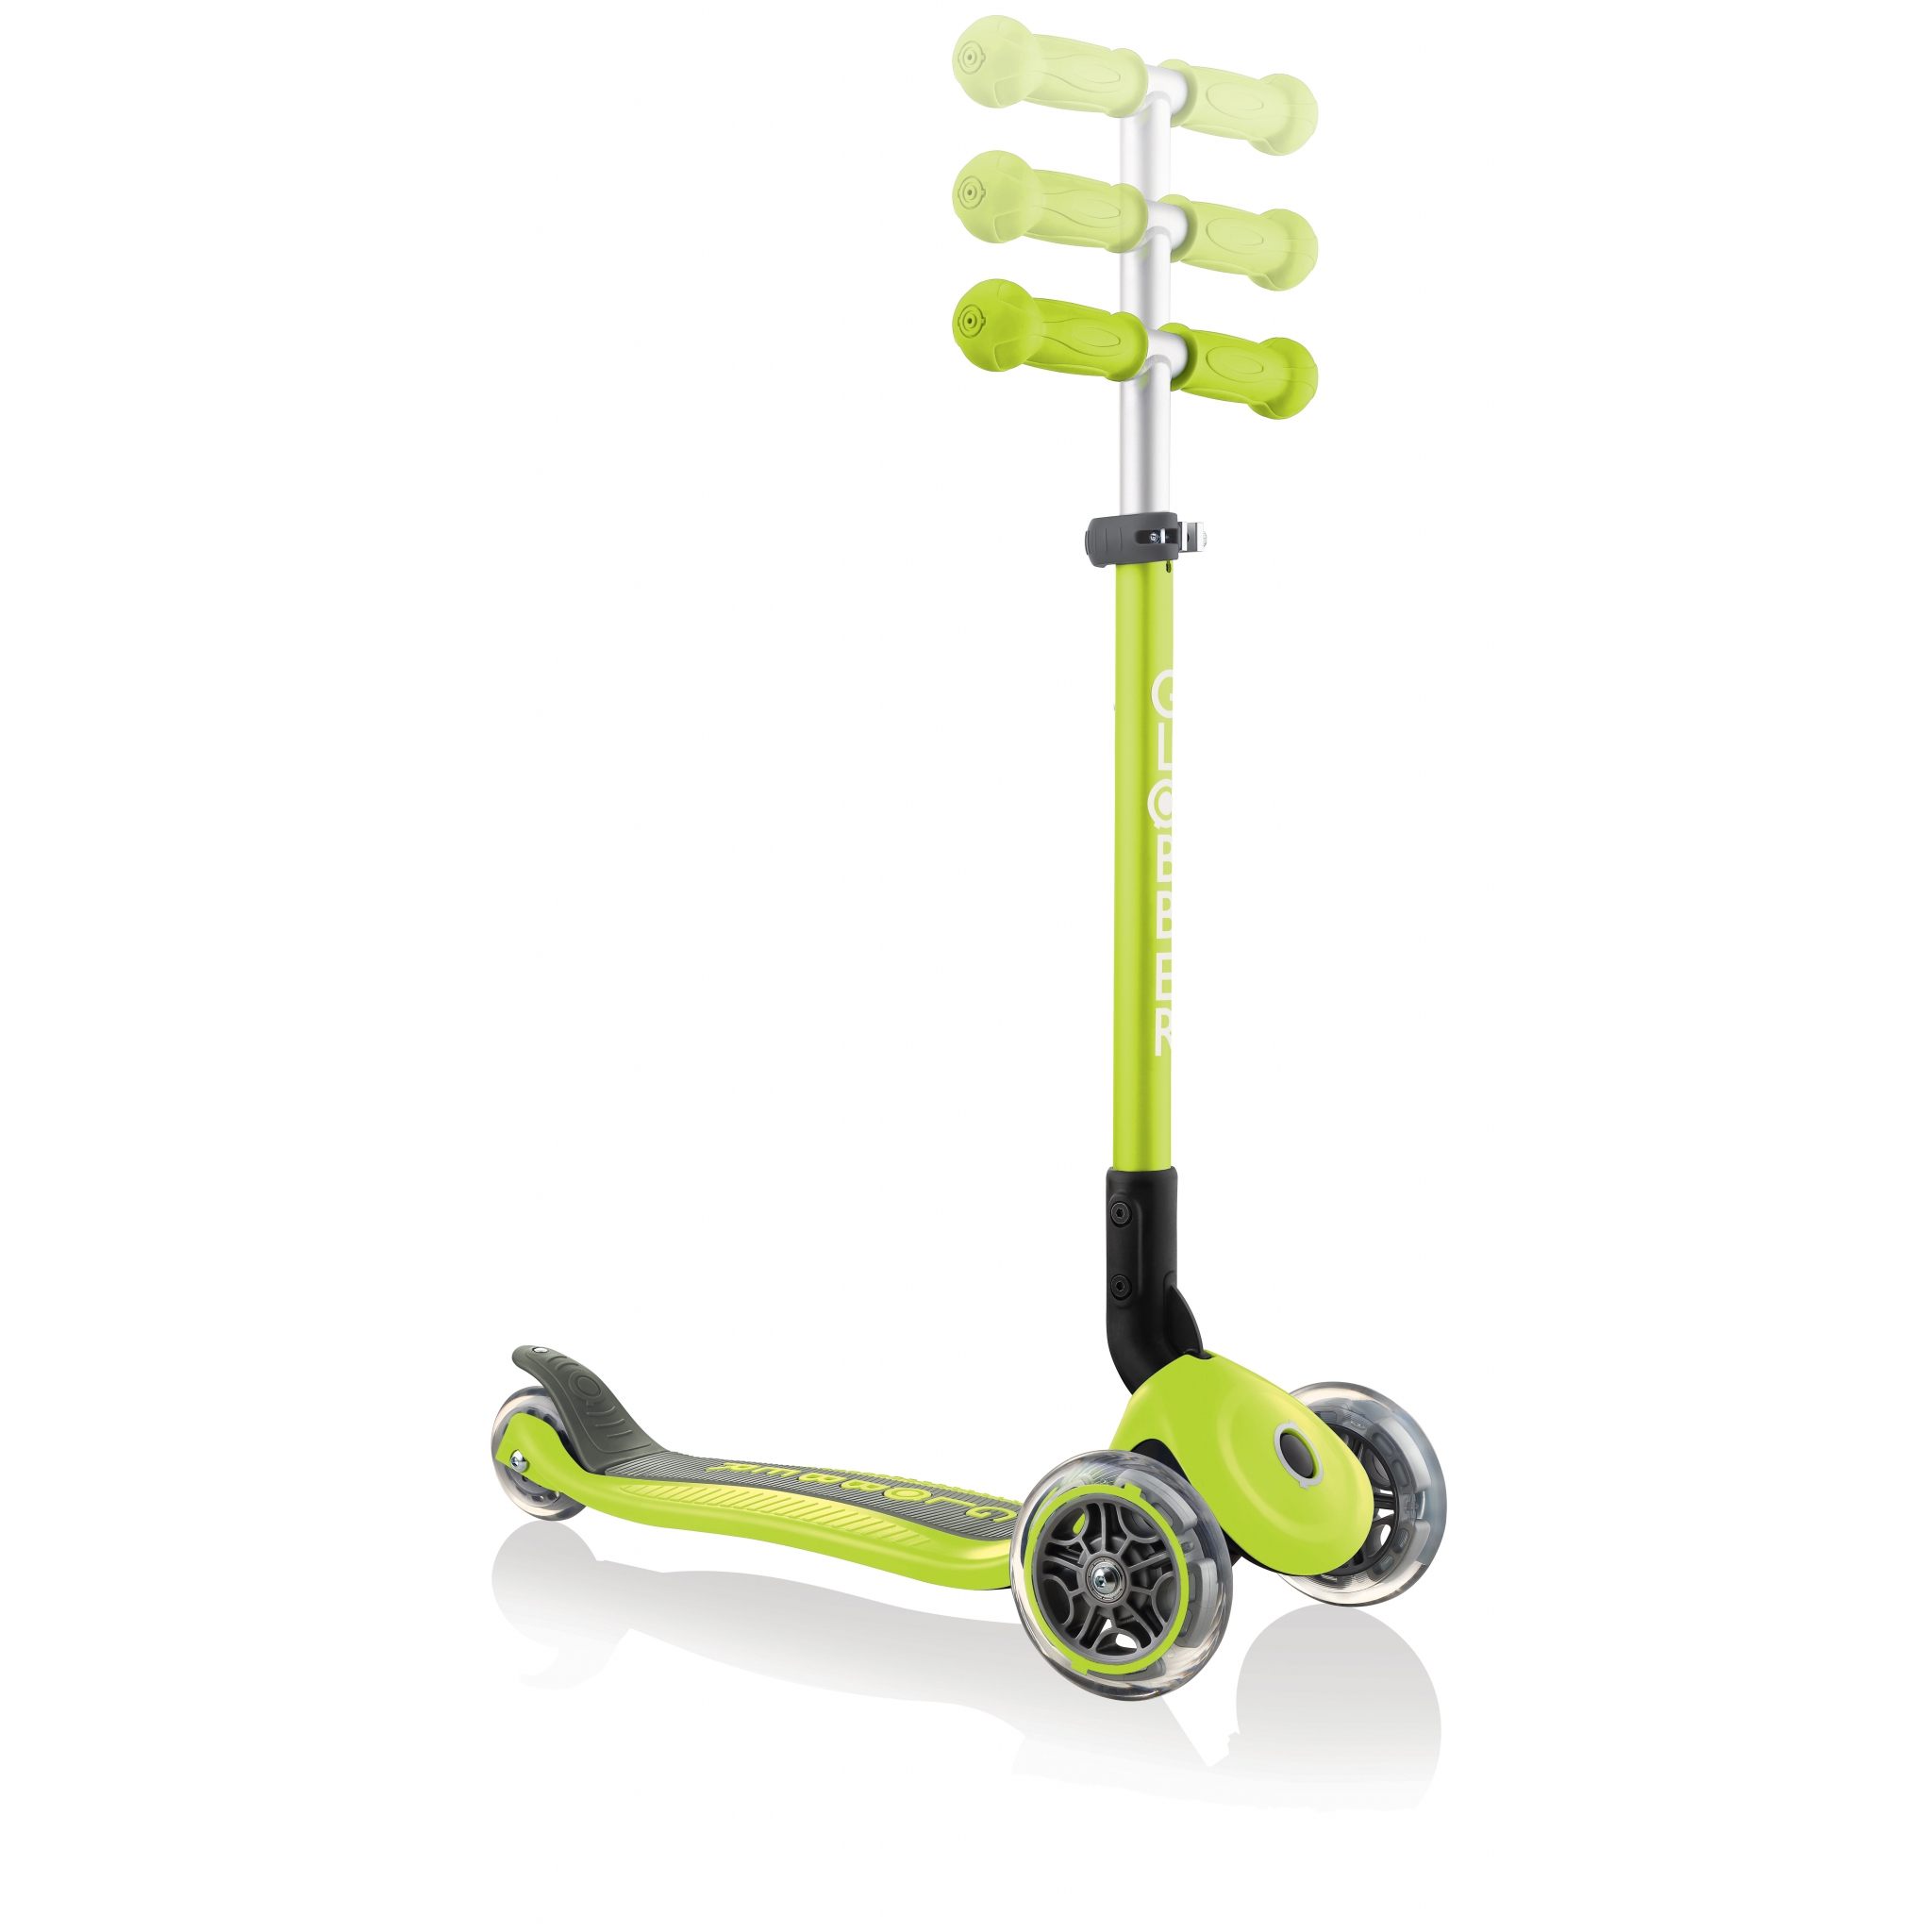 PRIMO-FOLDABLE-adjustable-scooter-for-kids-lime-green 3